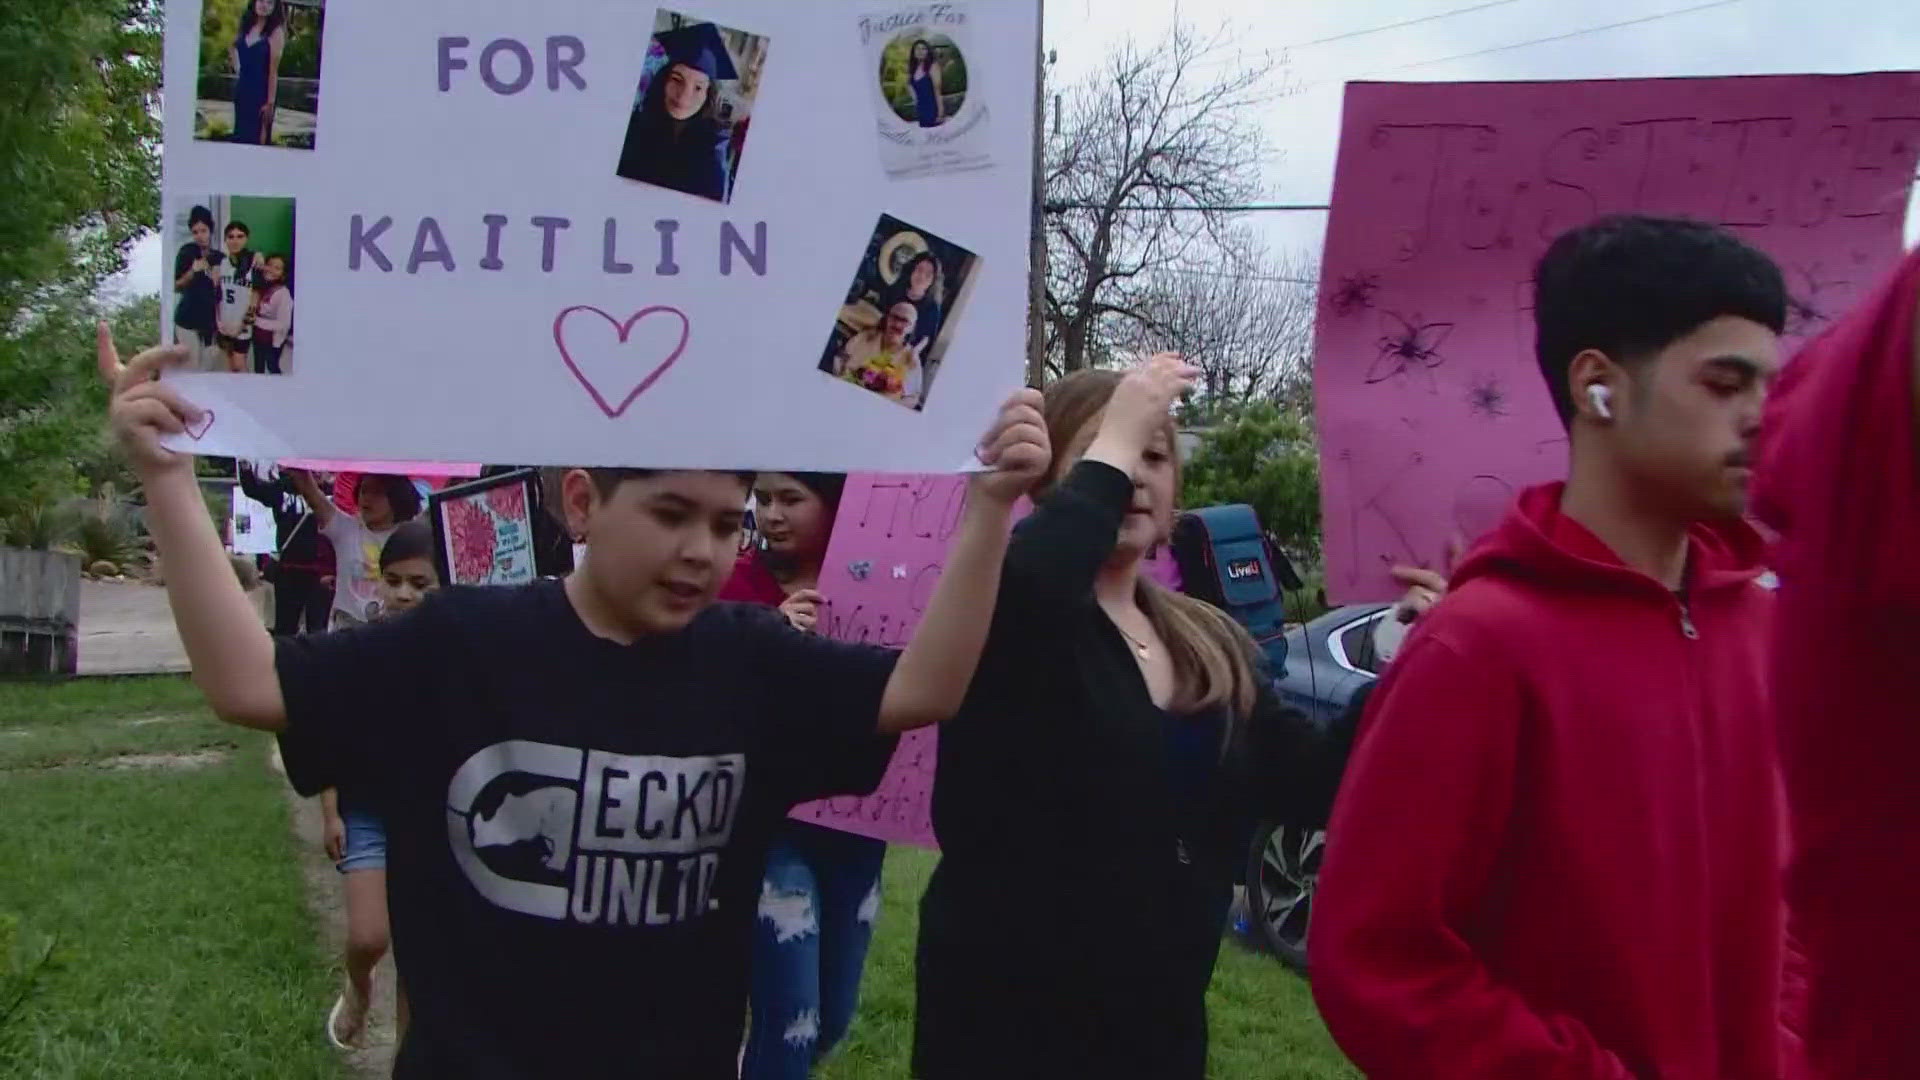 The San Antonio community gathered Sunday night for a march in honor of 17-year-old Kaitlin Hernandez, whose strangled body was found in a ditch earlier this month.